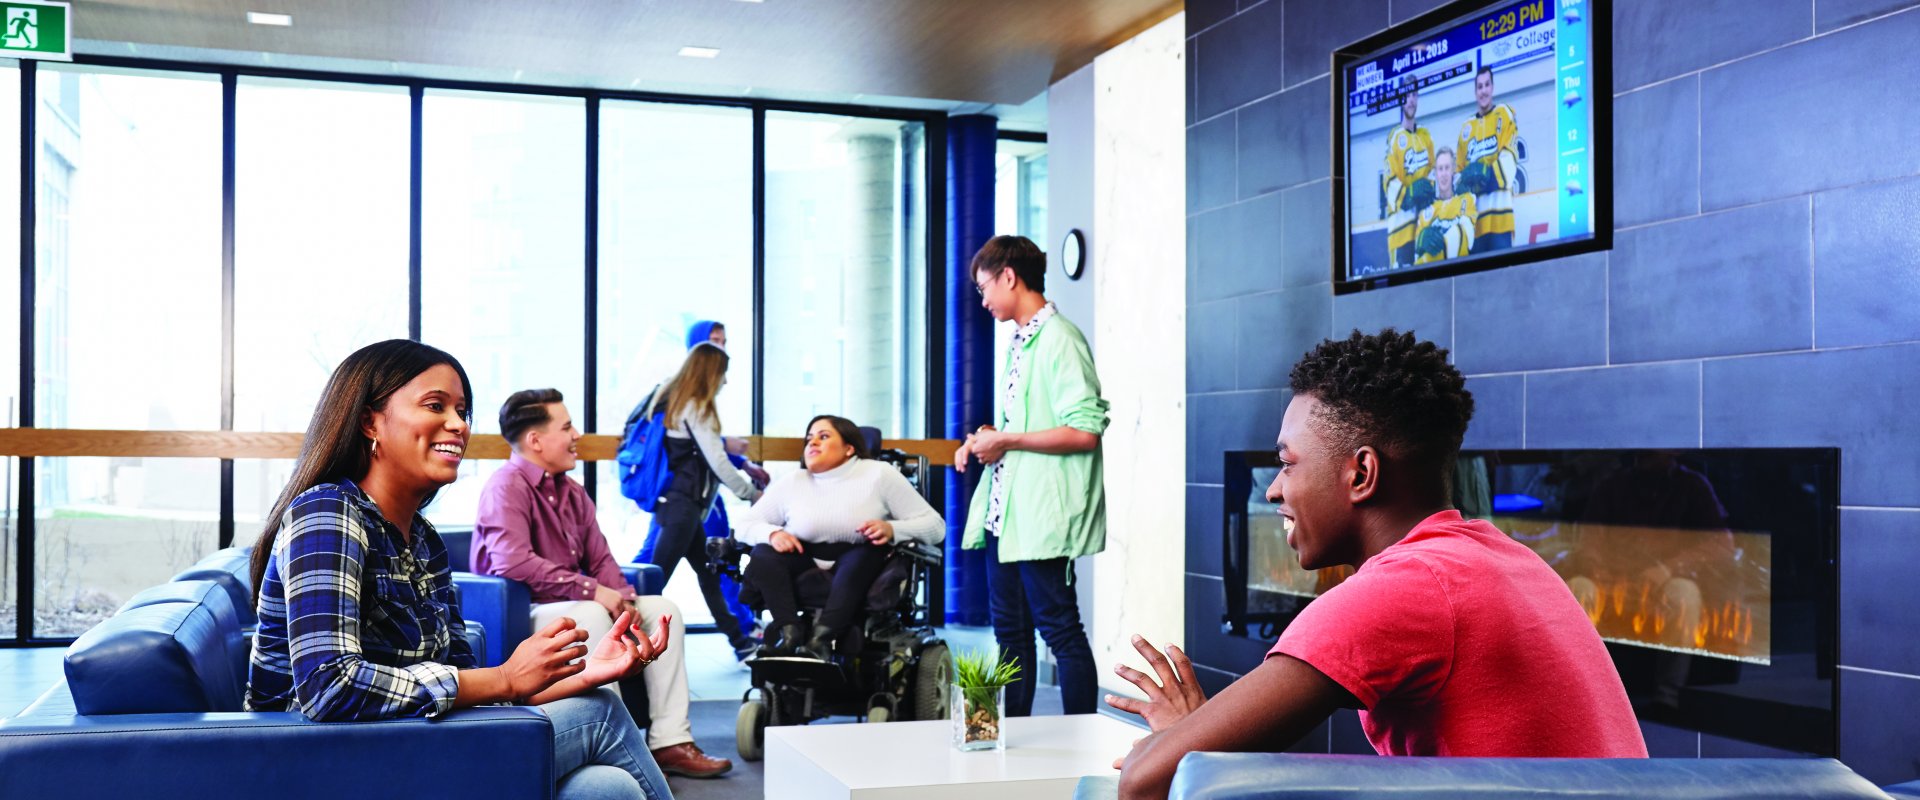 Students gather in a lounge area; one student is in a wheelchair